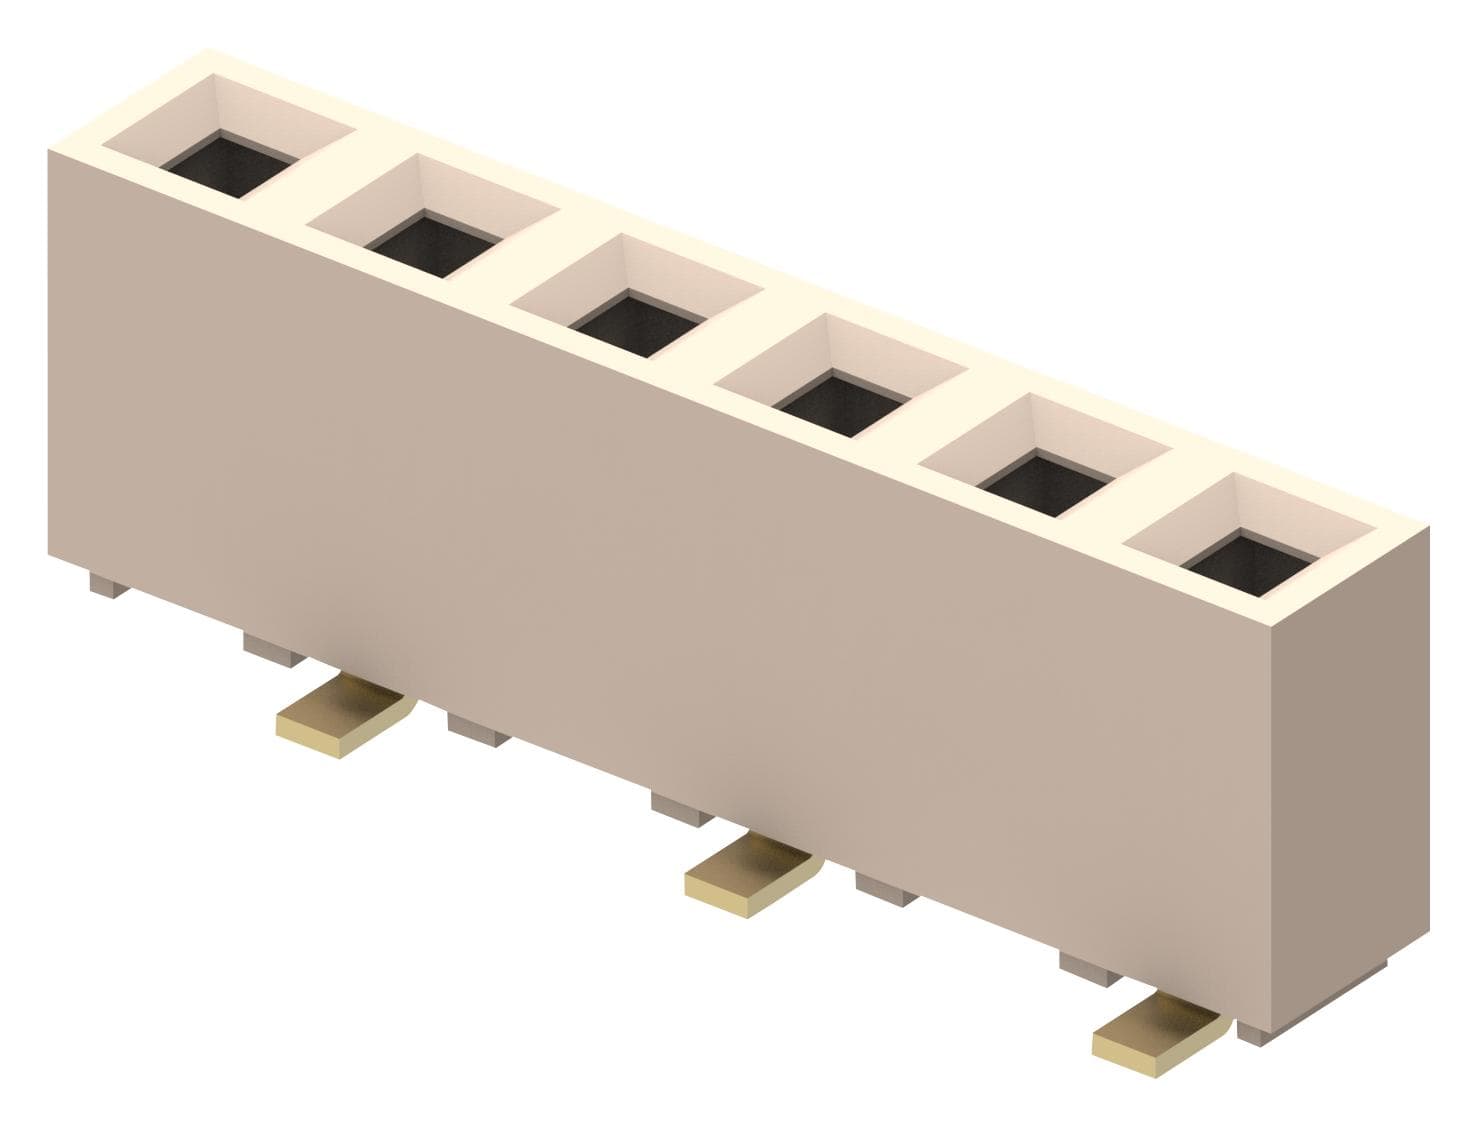 GCT (GLOBAL CONNECTOR TECHNOLOGY) Board-to-Board BG306-06-A-1-0400-L-B CONNECTOR, RCPT, 6POS, 1ROW, 2.54MM GCT (GLOBAL CONNECTOR TECHNOLOGY) 2443091 BG306-06-A-1-0400-L-B